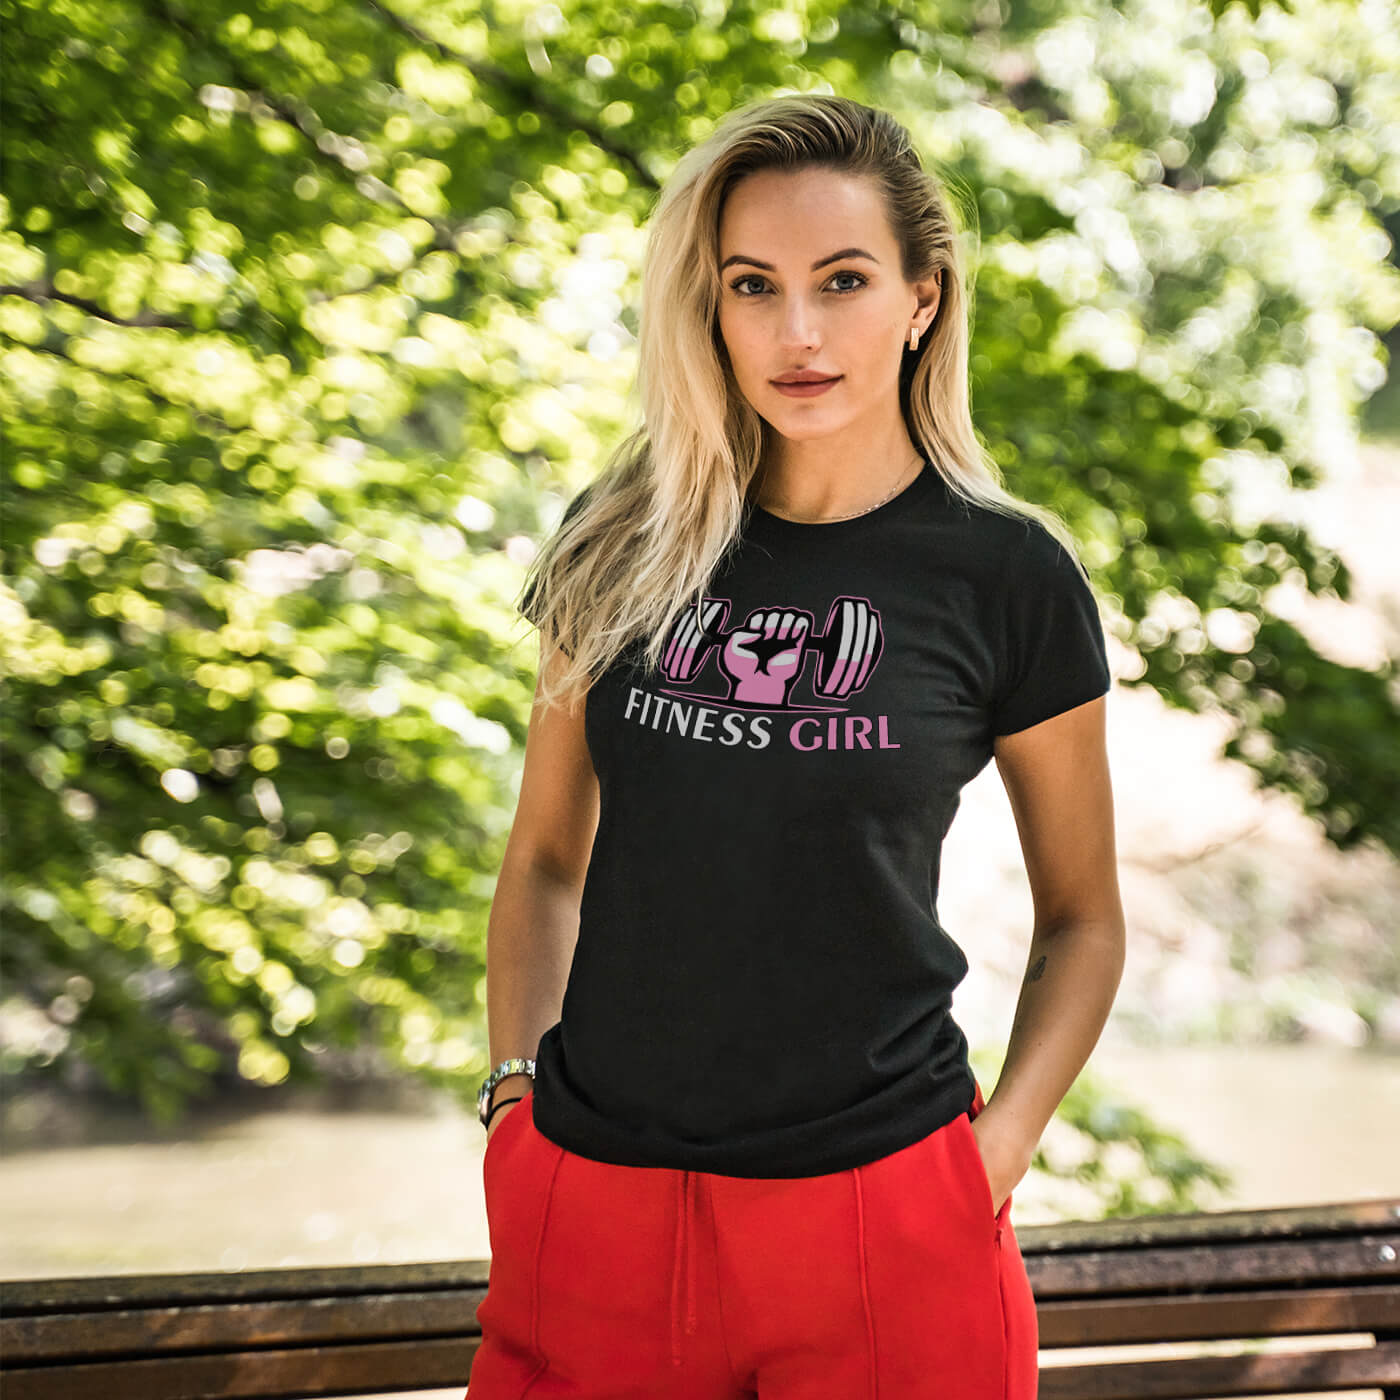 Arkæologiske Fare Interconnect Women T shirts With Prints "Fitness Girl". Perfect Gifts For Her.